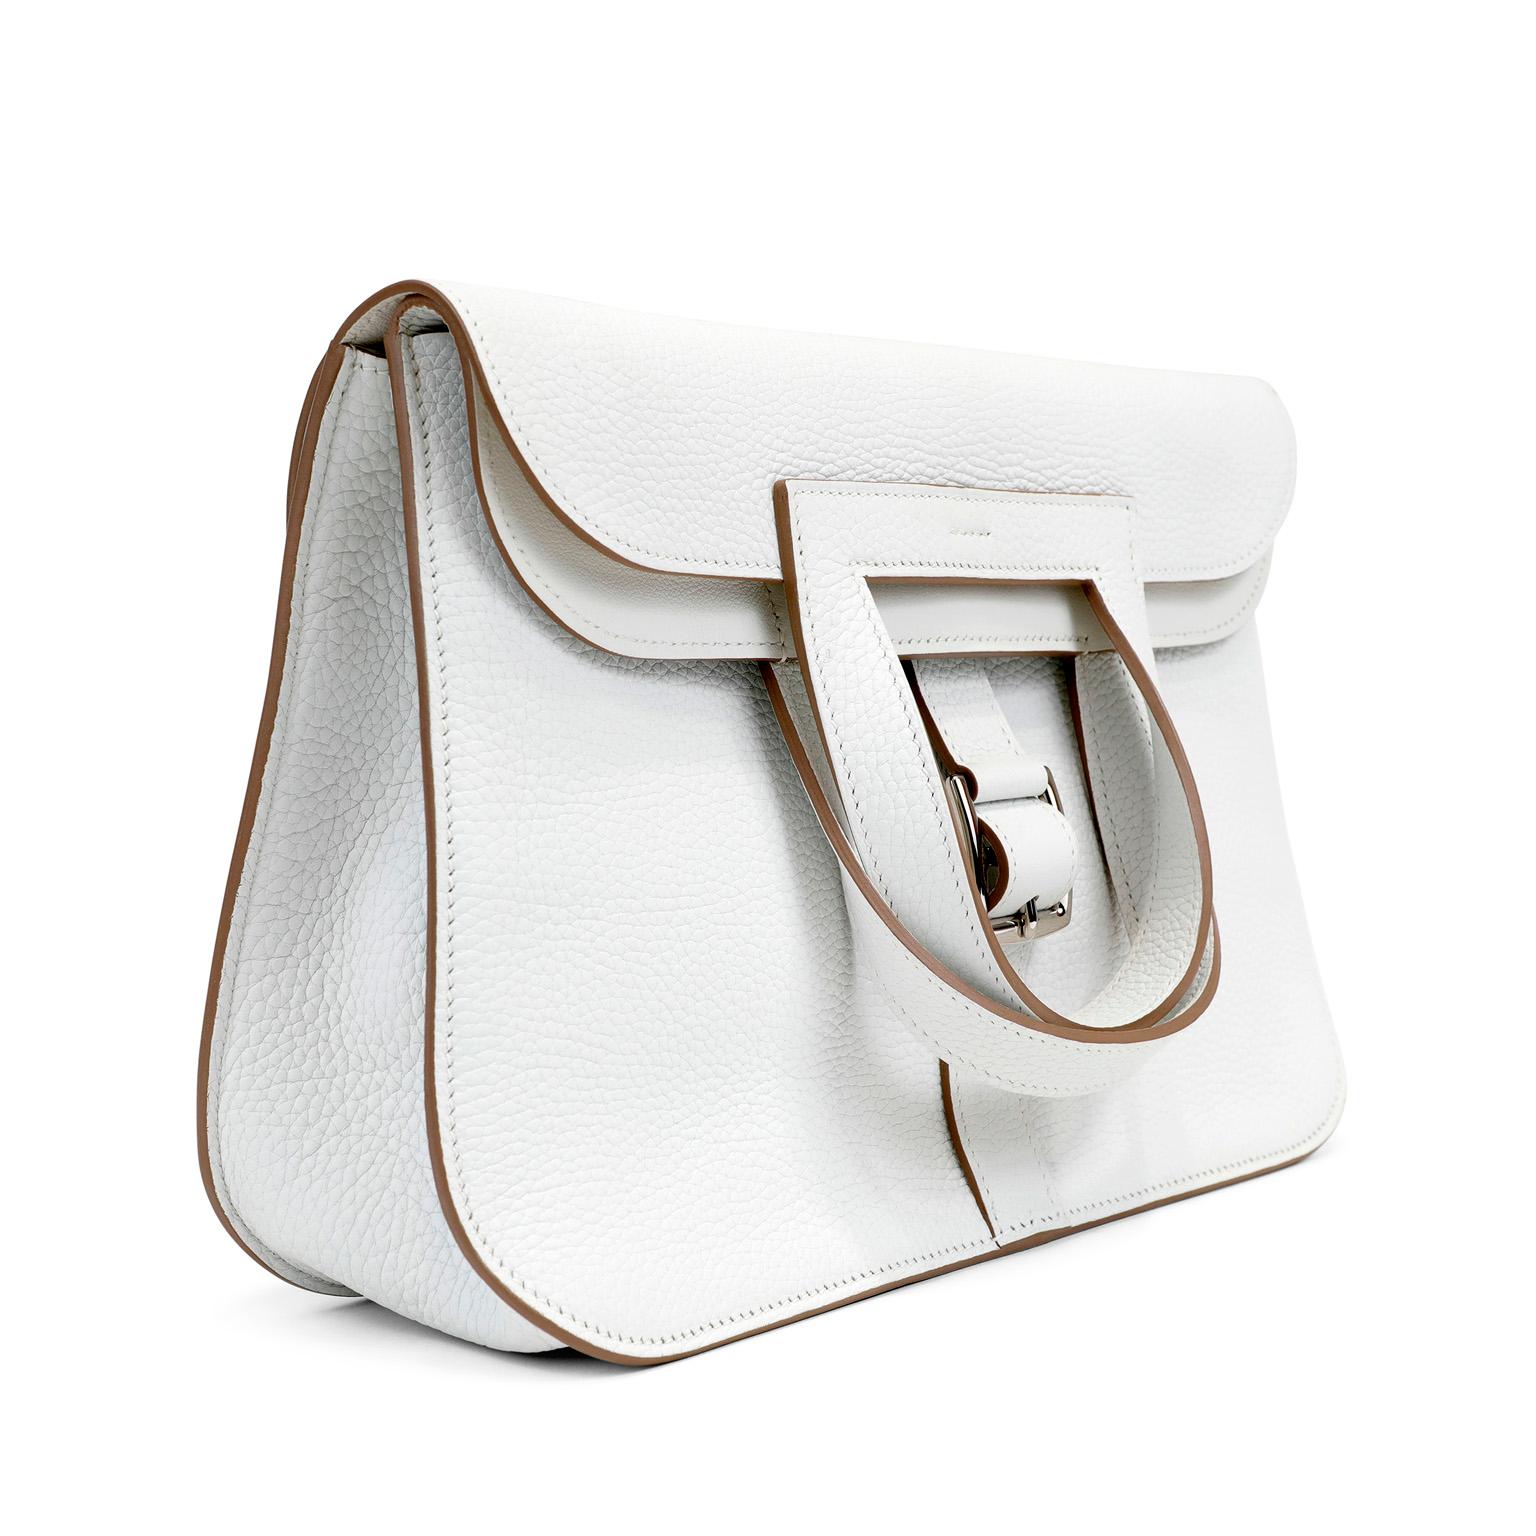 This authentic Hermès White Togo Leather Halzan 31 is in pristine condition.    Hermès bags are considered the ultimate luxury item worldwide.  The Halzan is a lesser known style, but no less chic than the Birkin or Kelly.
Snowy white Togo leather